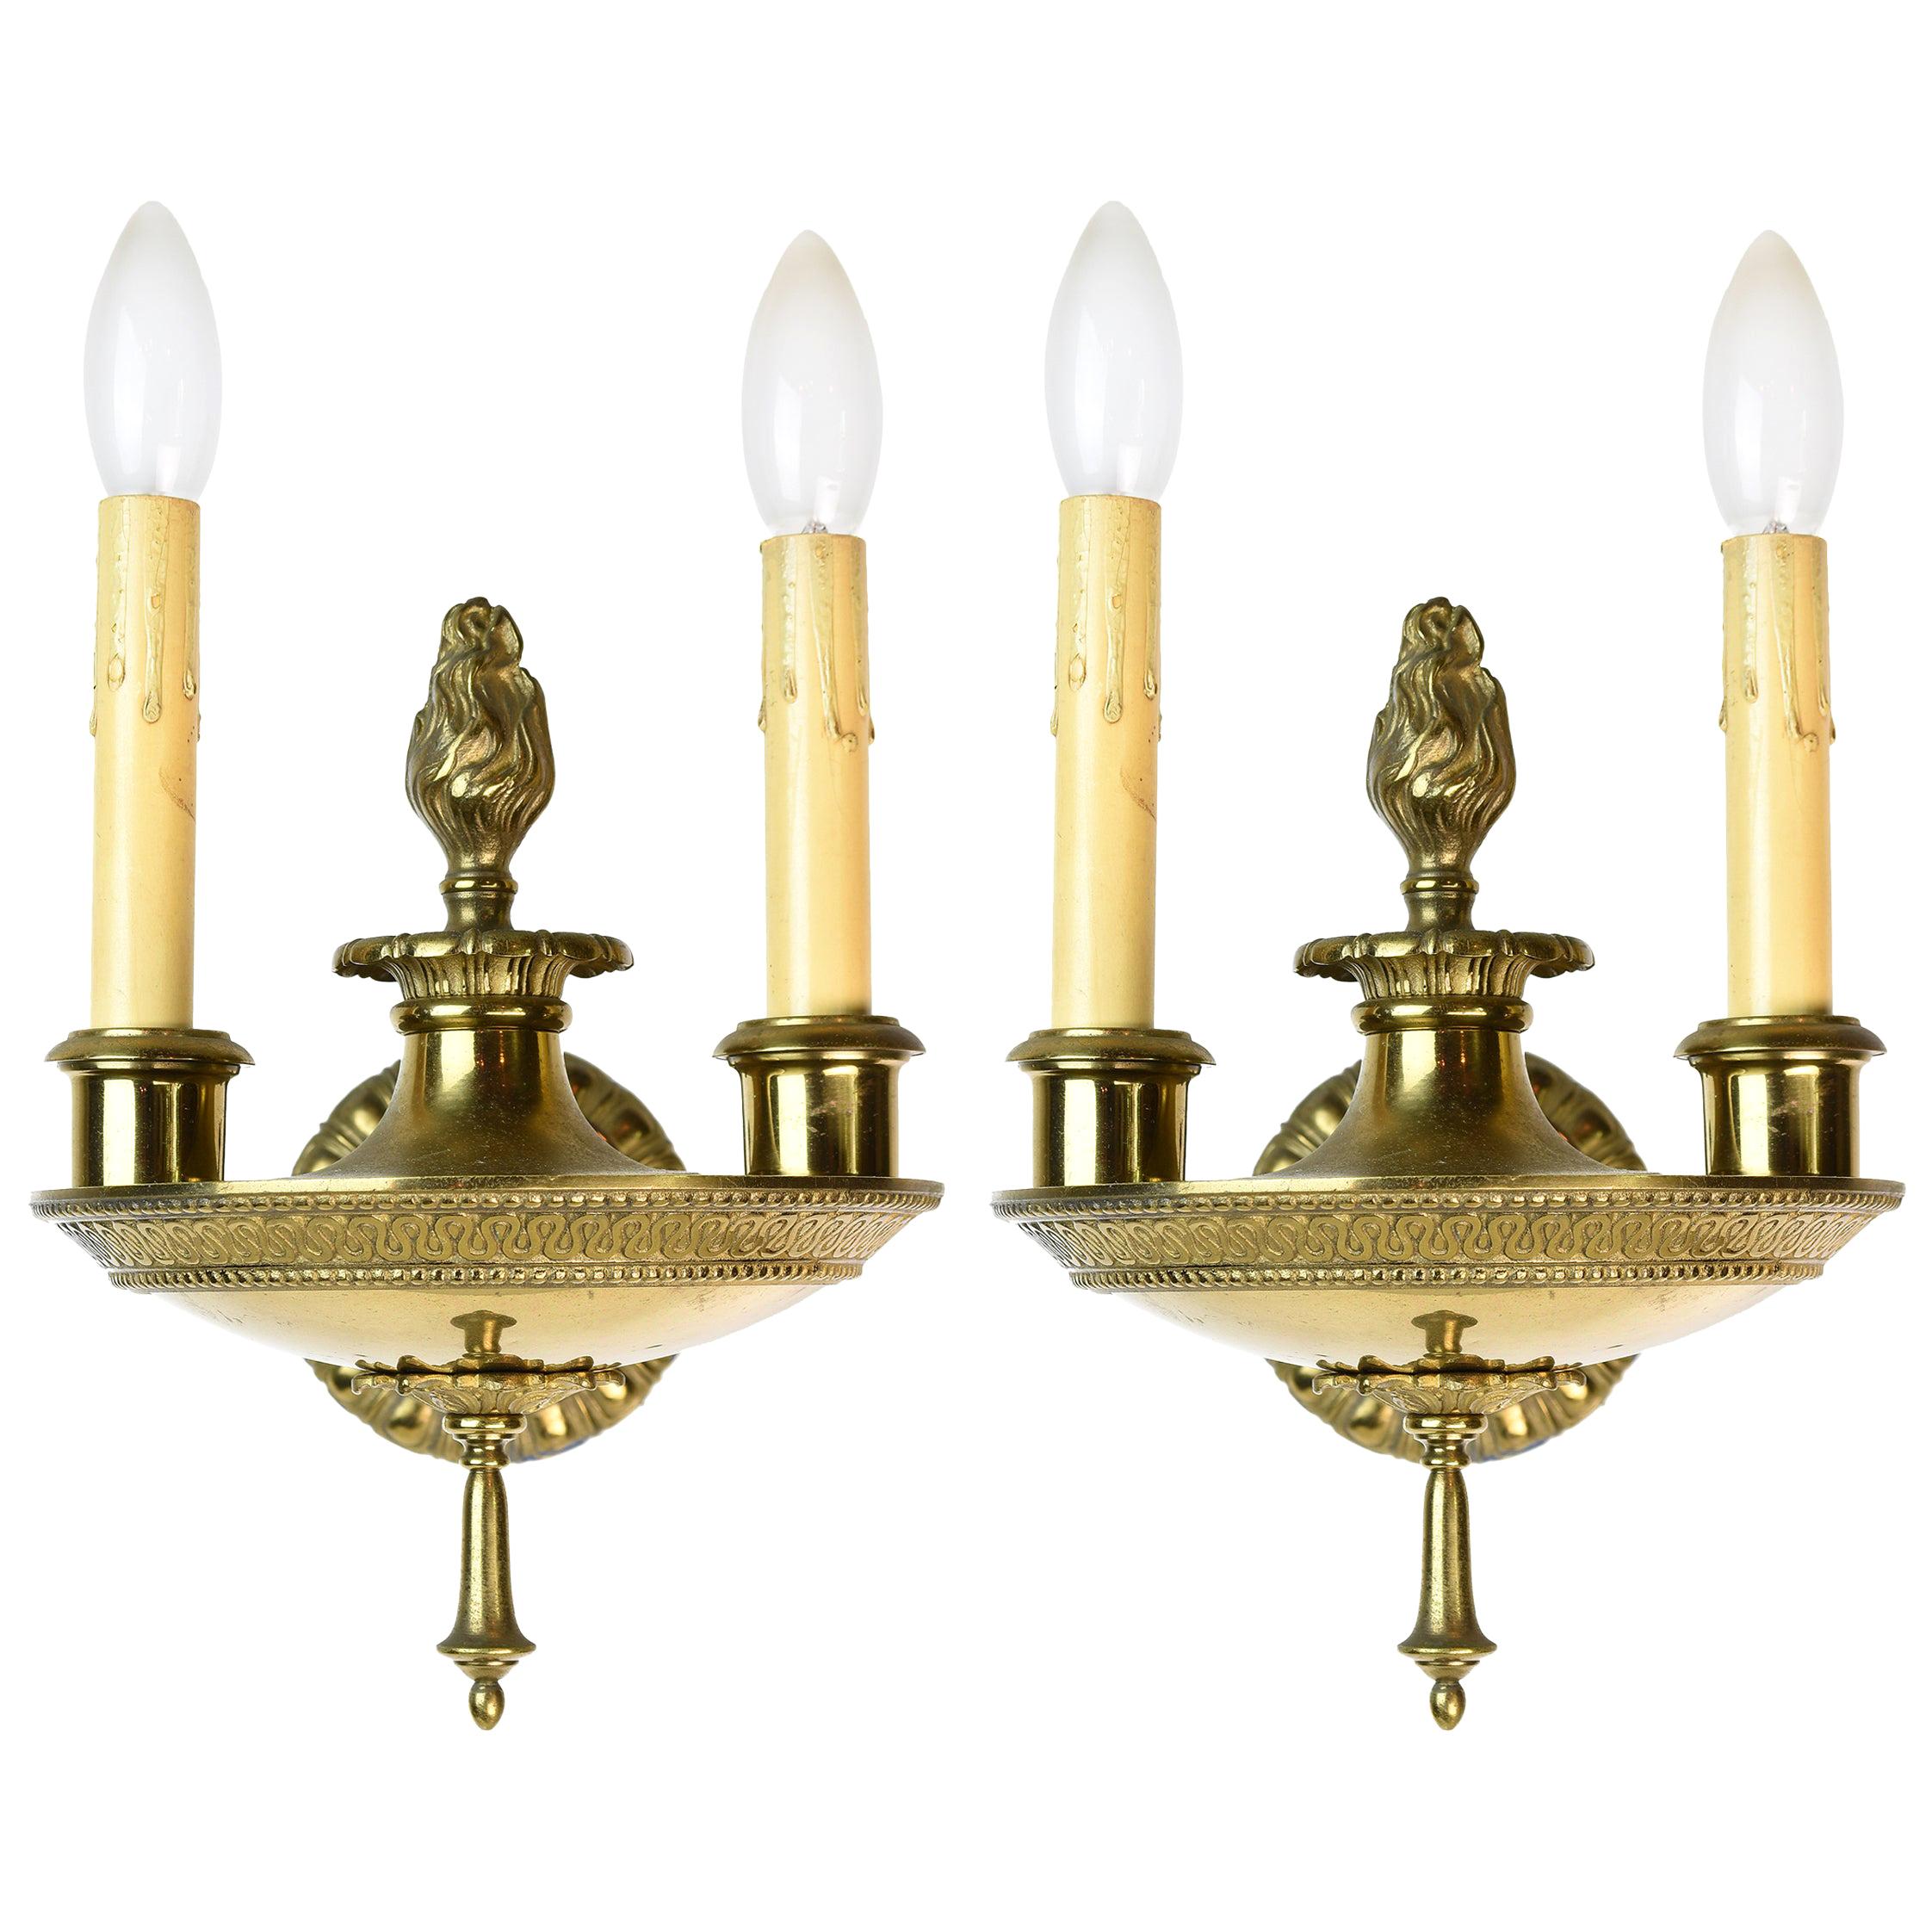 Bradley and Hubbard Neoclassical Sconce Set